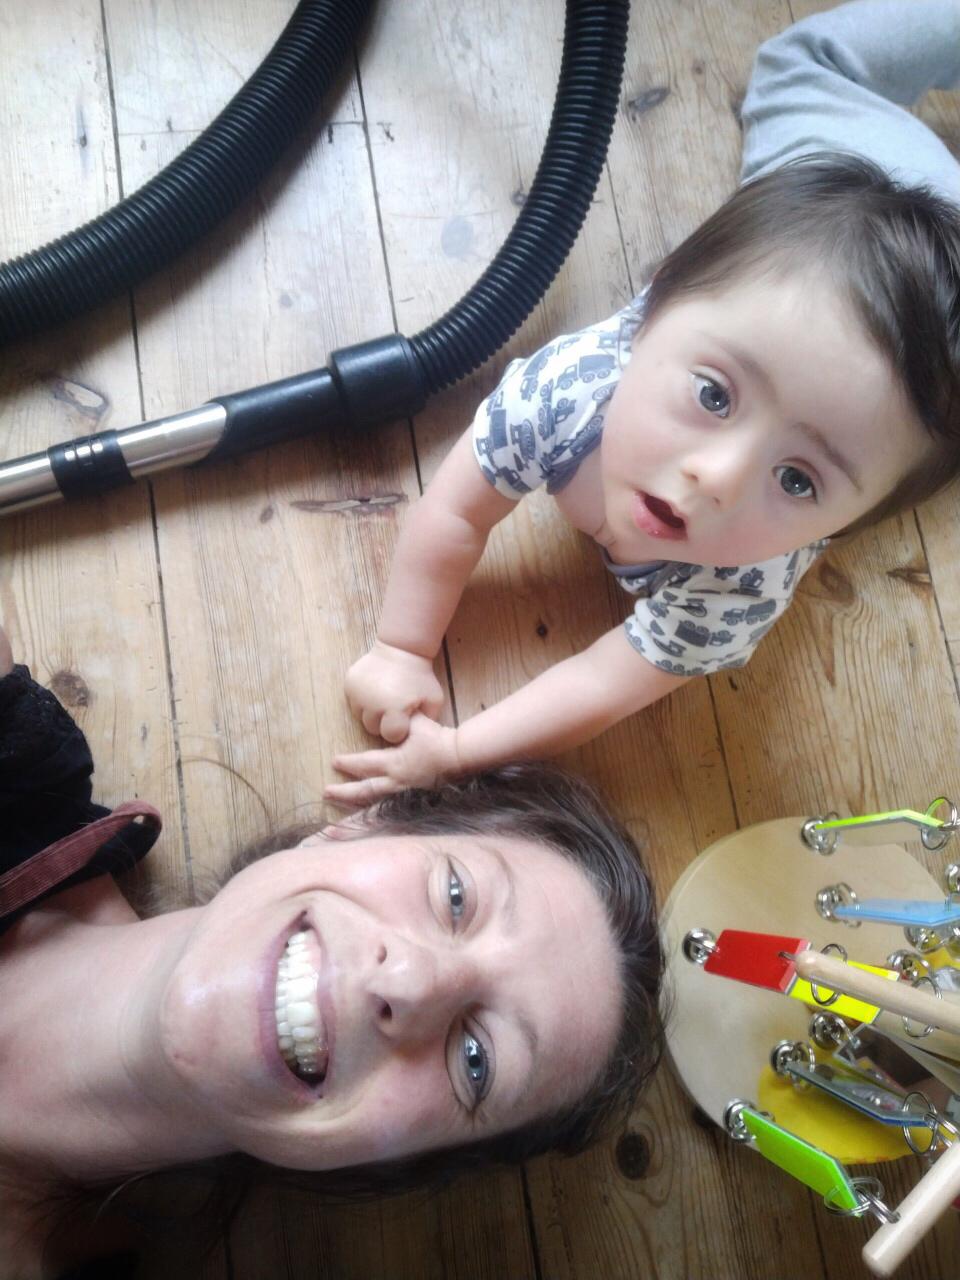 A mum lies on her back on a wooden floor. She's smiling up at the camera. Next to her is a baby who has Down's syndrome, also looking up at the camera.